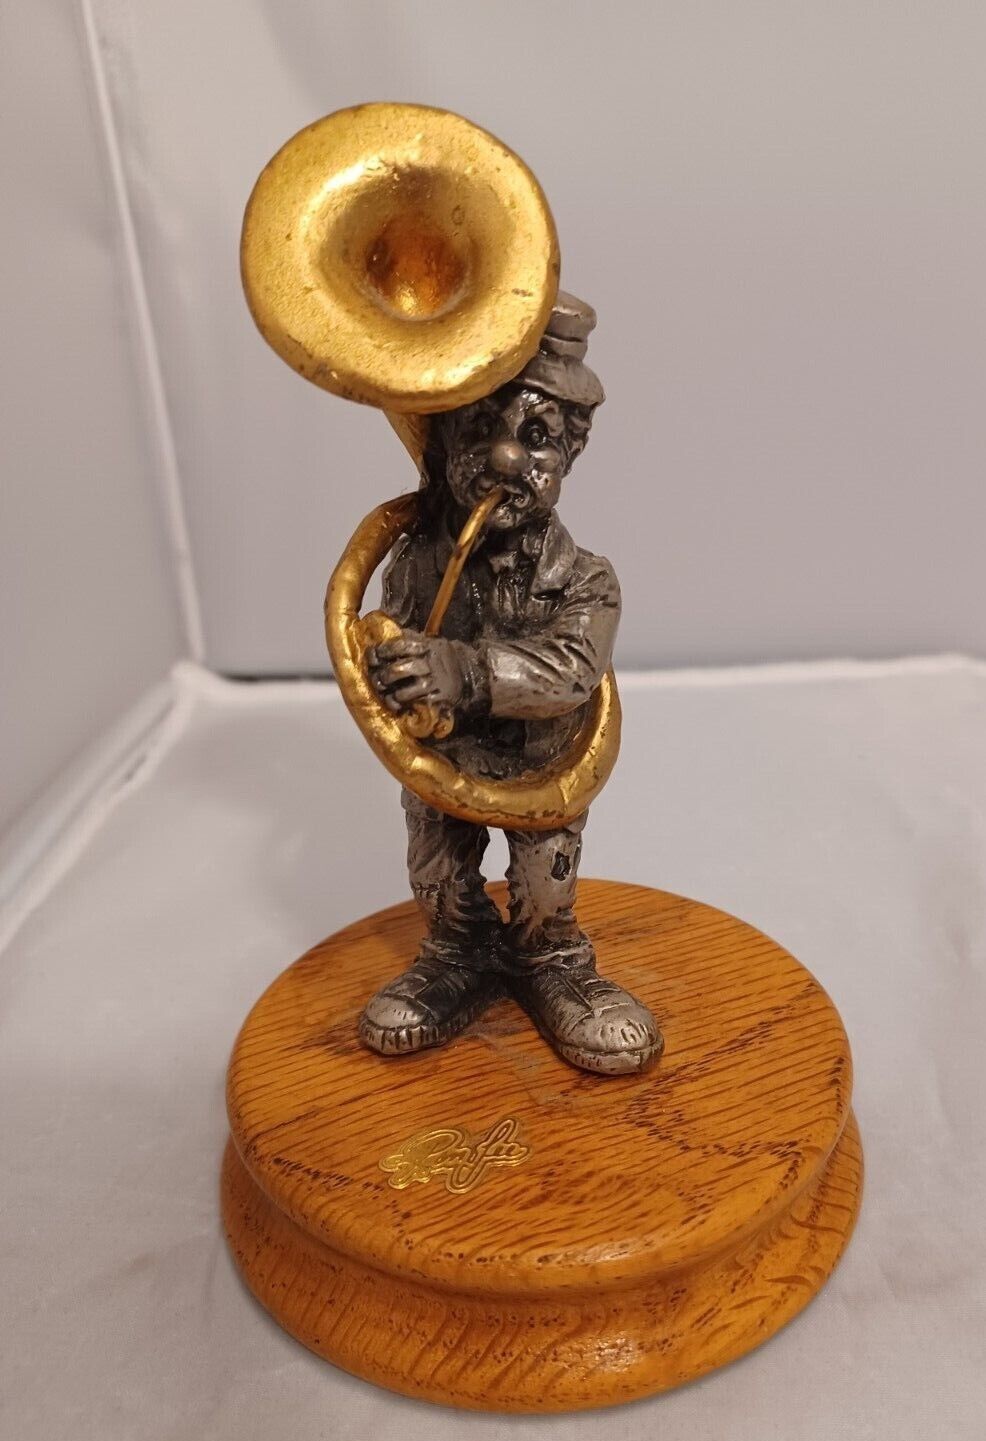 UNIQUE VINTAGE RON LEE PEWTER FIGURINE OF MAN PLAYING TUBA ON WOOD BASE